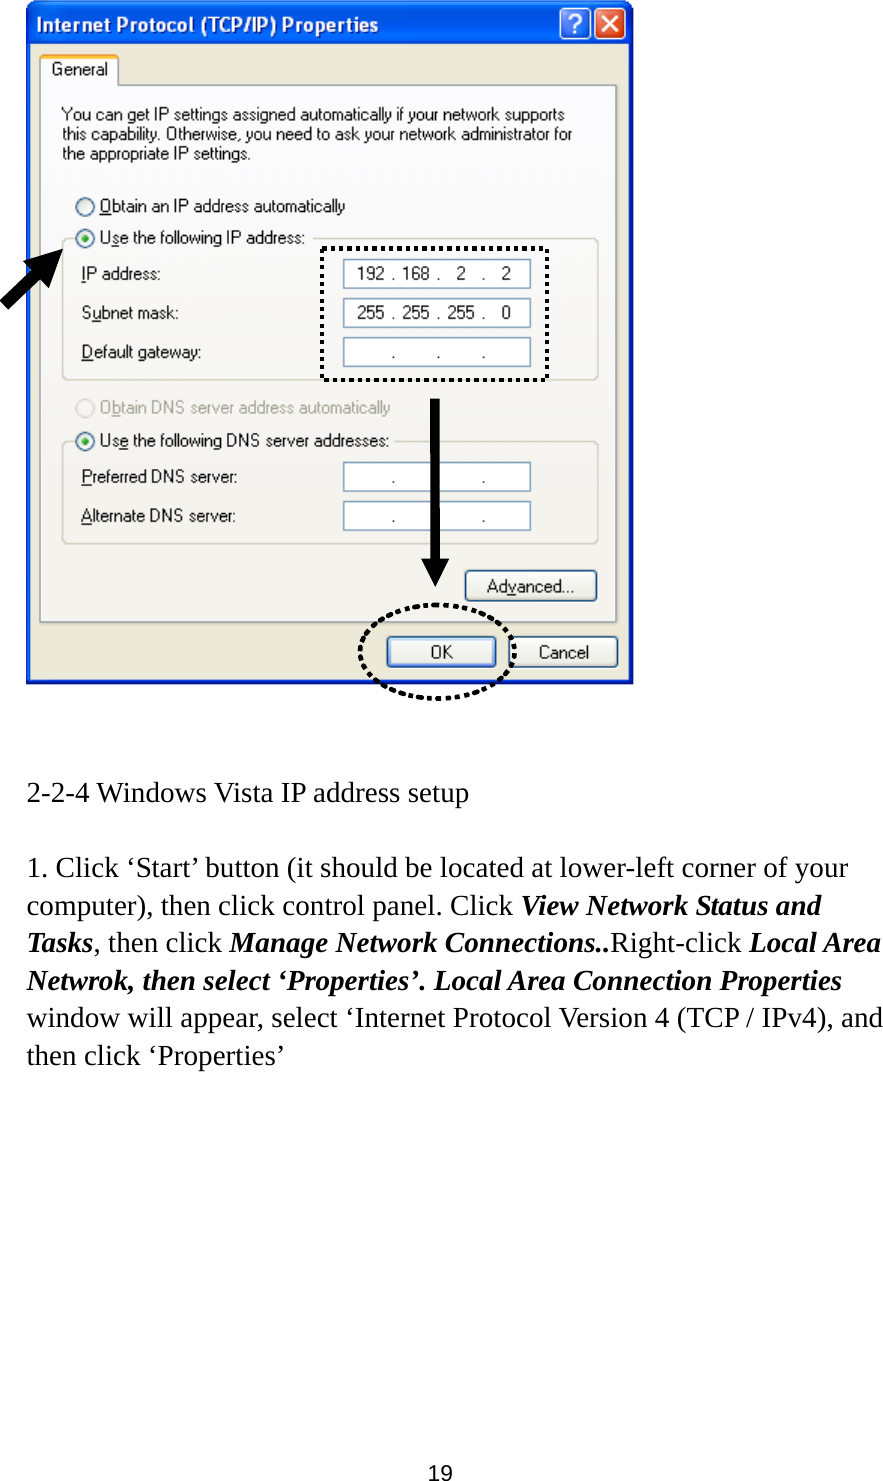 19    2-2-4 Windows Vista IP address setup  1. Click ‘Start’ button (it should be located at lower-left corner of your computer), then click control panel. Click View Network Status and Tasks, then click Manage Network Connections..Right-click Local Area Netwrok, then select ‘Properties’. Local Area Connection Properties window will appear, select ‘Internet Protocol Version 4 (TCP / IPv4), and then click ‘Properties’  